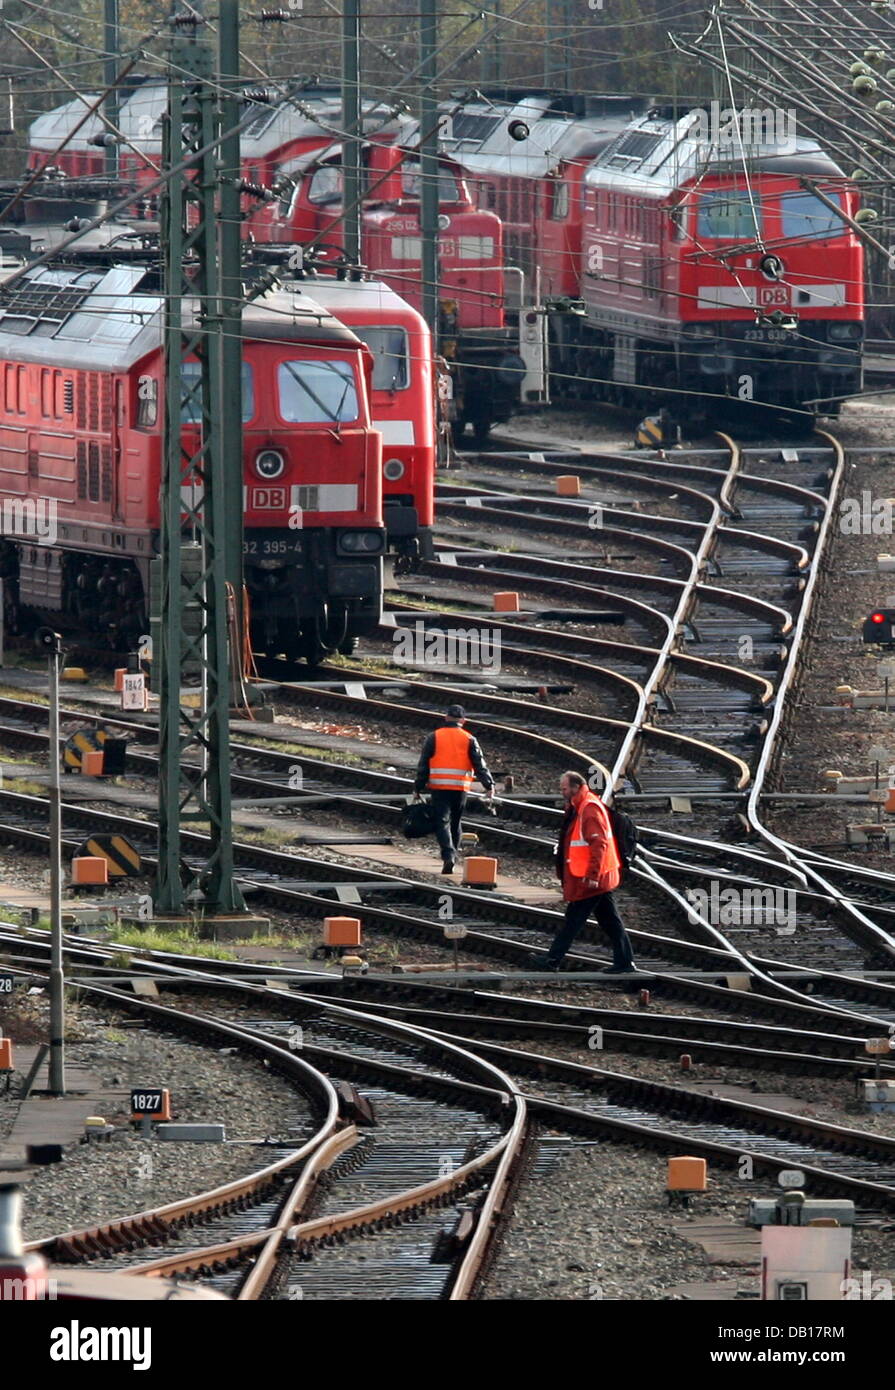 Engine drivers walk over Europe's biggest marshalling yard in Hamburg, Germany, 14 November 2007. The GDL union representing the majority of Germany's train drivers called out a renewed strike to hit goods and passenger traffic simultaneously. On Tuesday, GDL boss Manfred Schell announced that the union's members would cease work on goods trains from midday on Wednesday and on pass Stock Photo